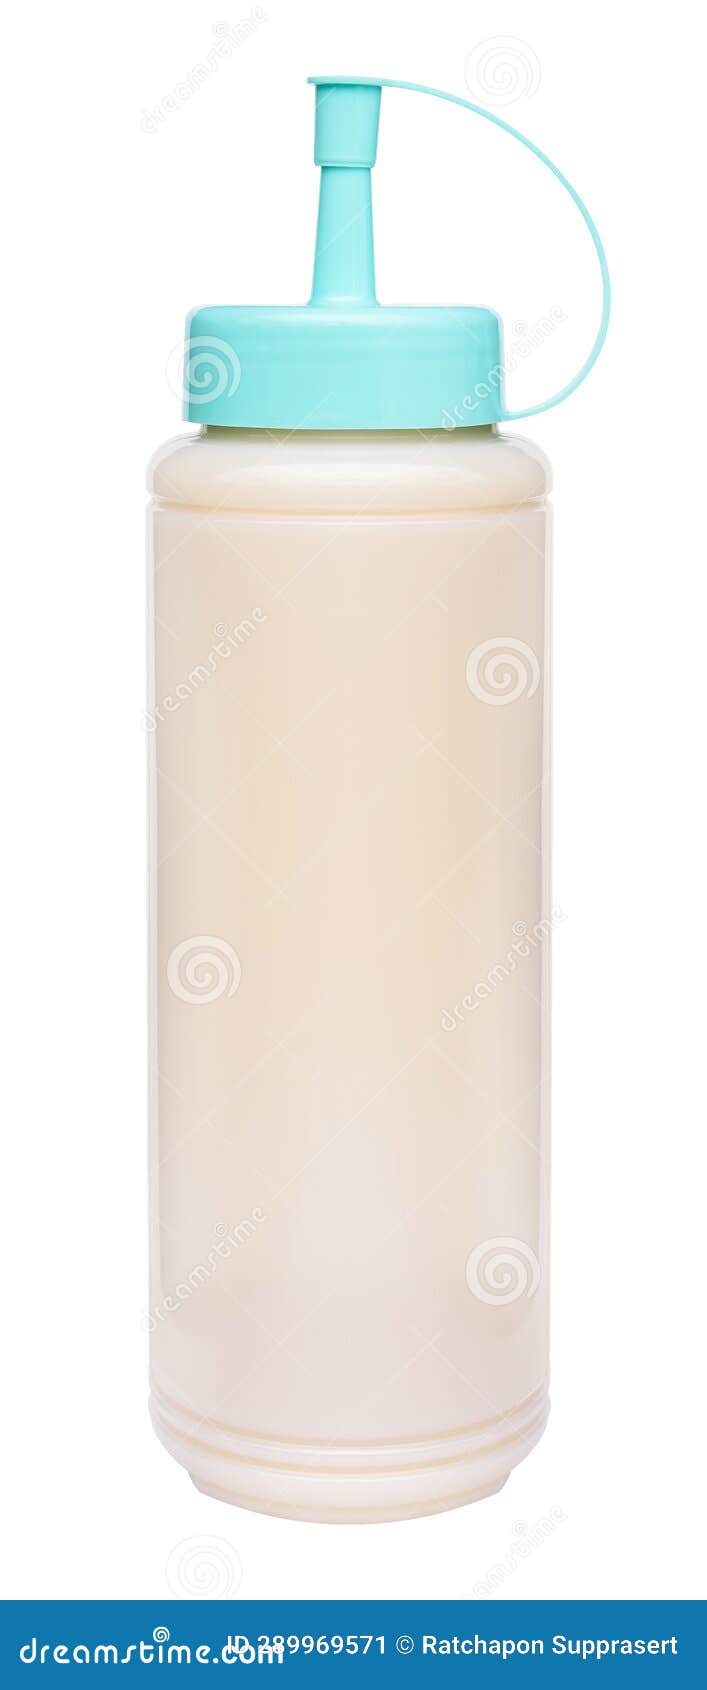 https://thumbs.dreamstime.com/z/condensed-milk-white-plastic-bottle-isolated-background-clipping-path-289969571.jpg